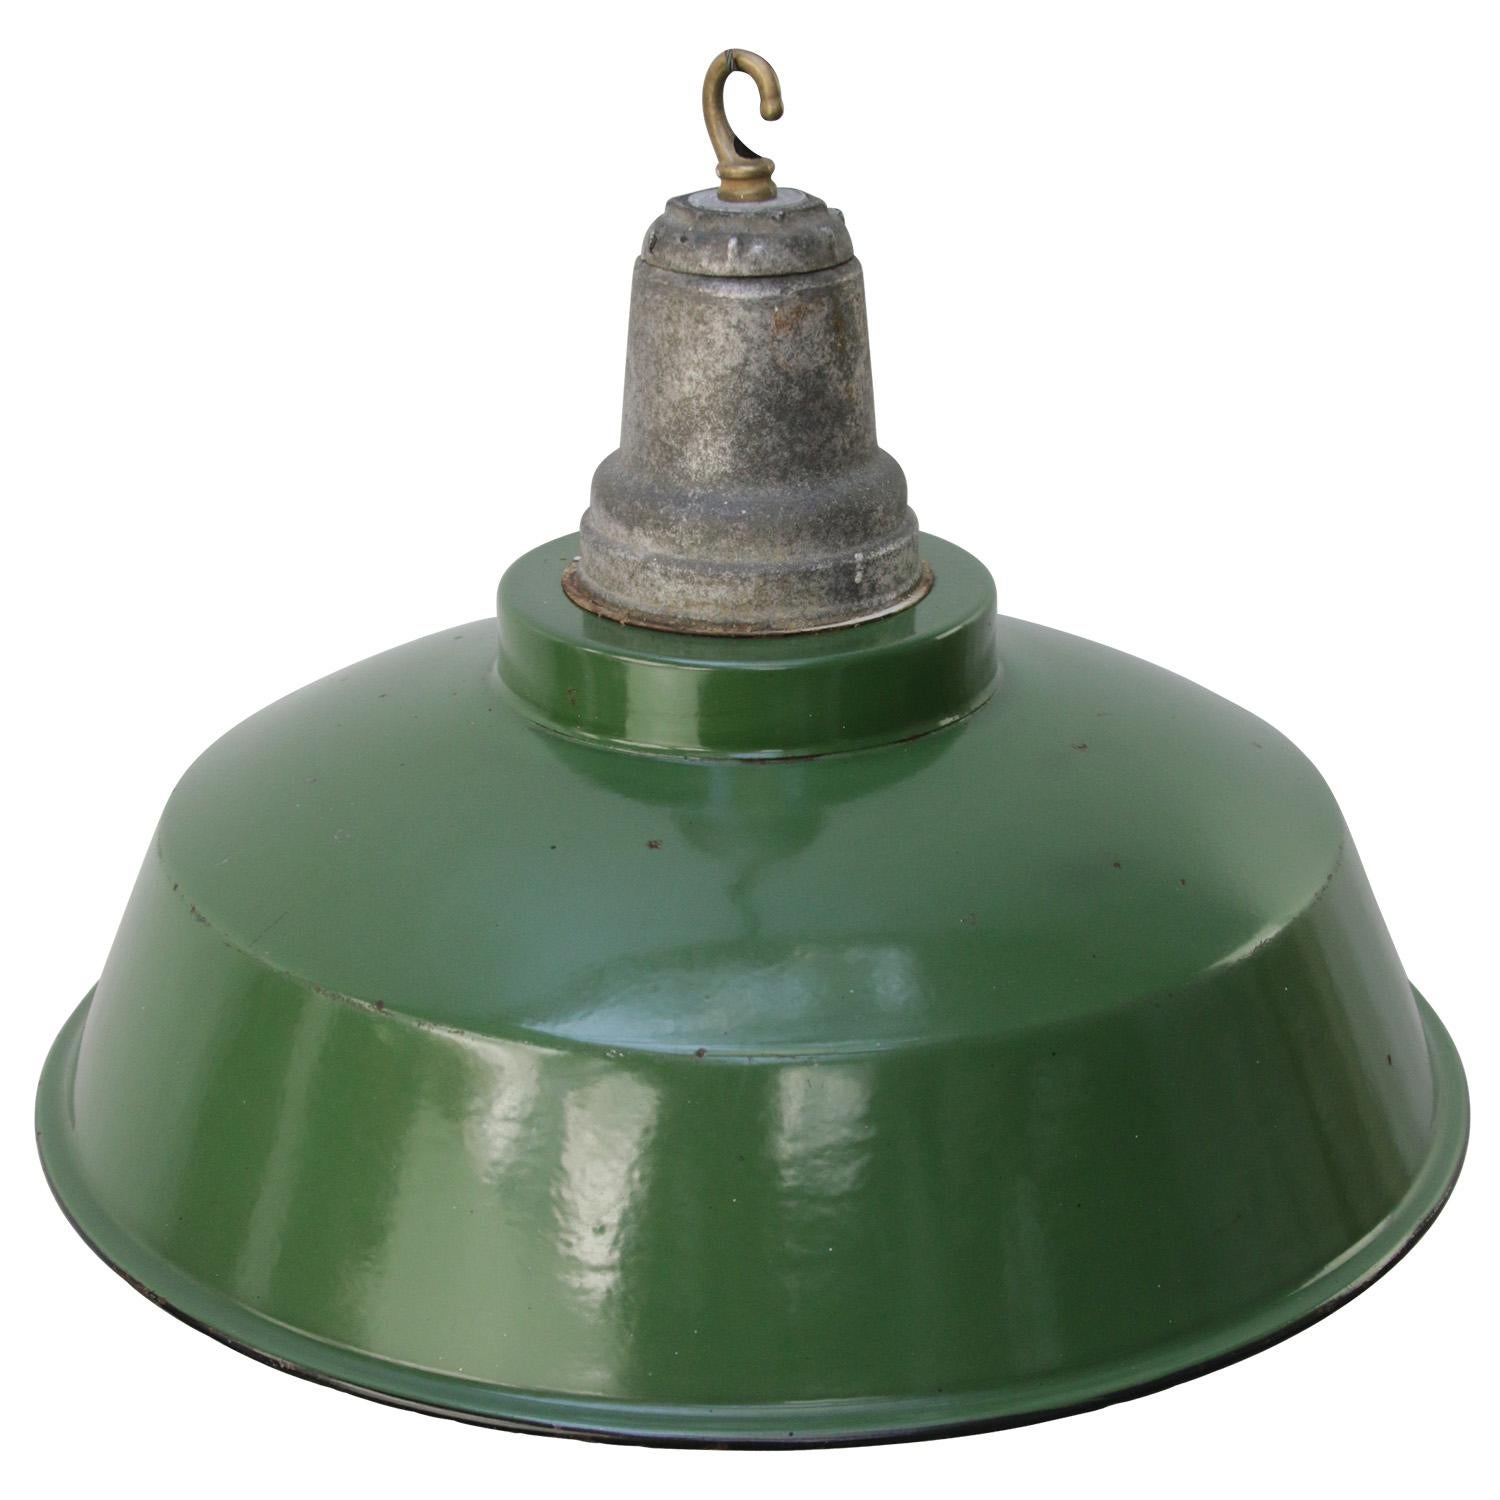 American industrial factory pendant light.
Green enamel white interior.
Metal top
Clear glass

Weight 2.20 kg / 4.9 lb

Priced per individual item. All lamps have been made suitable by international standards for incandescent light bulbs,